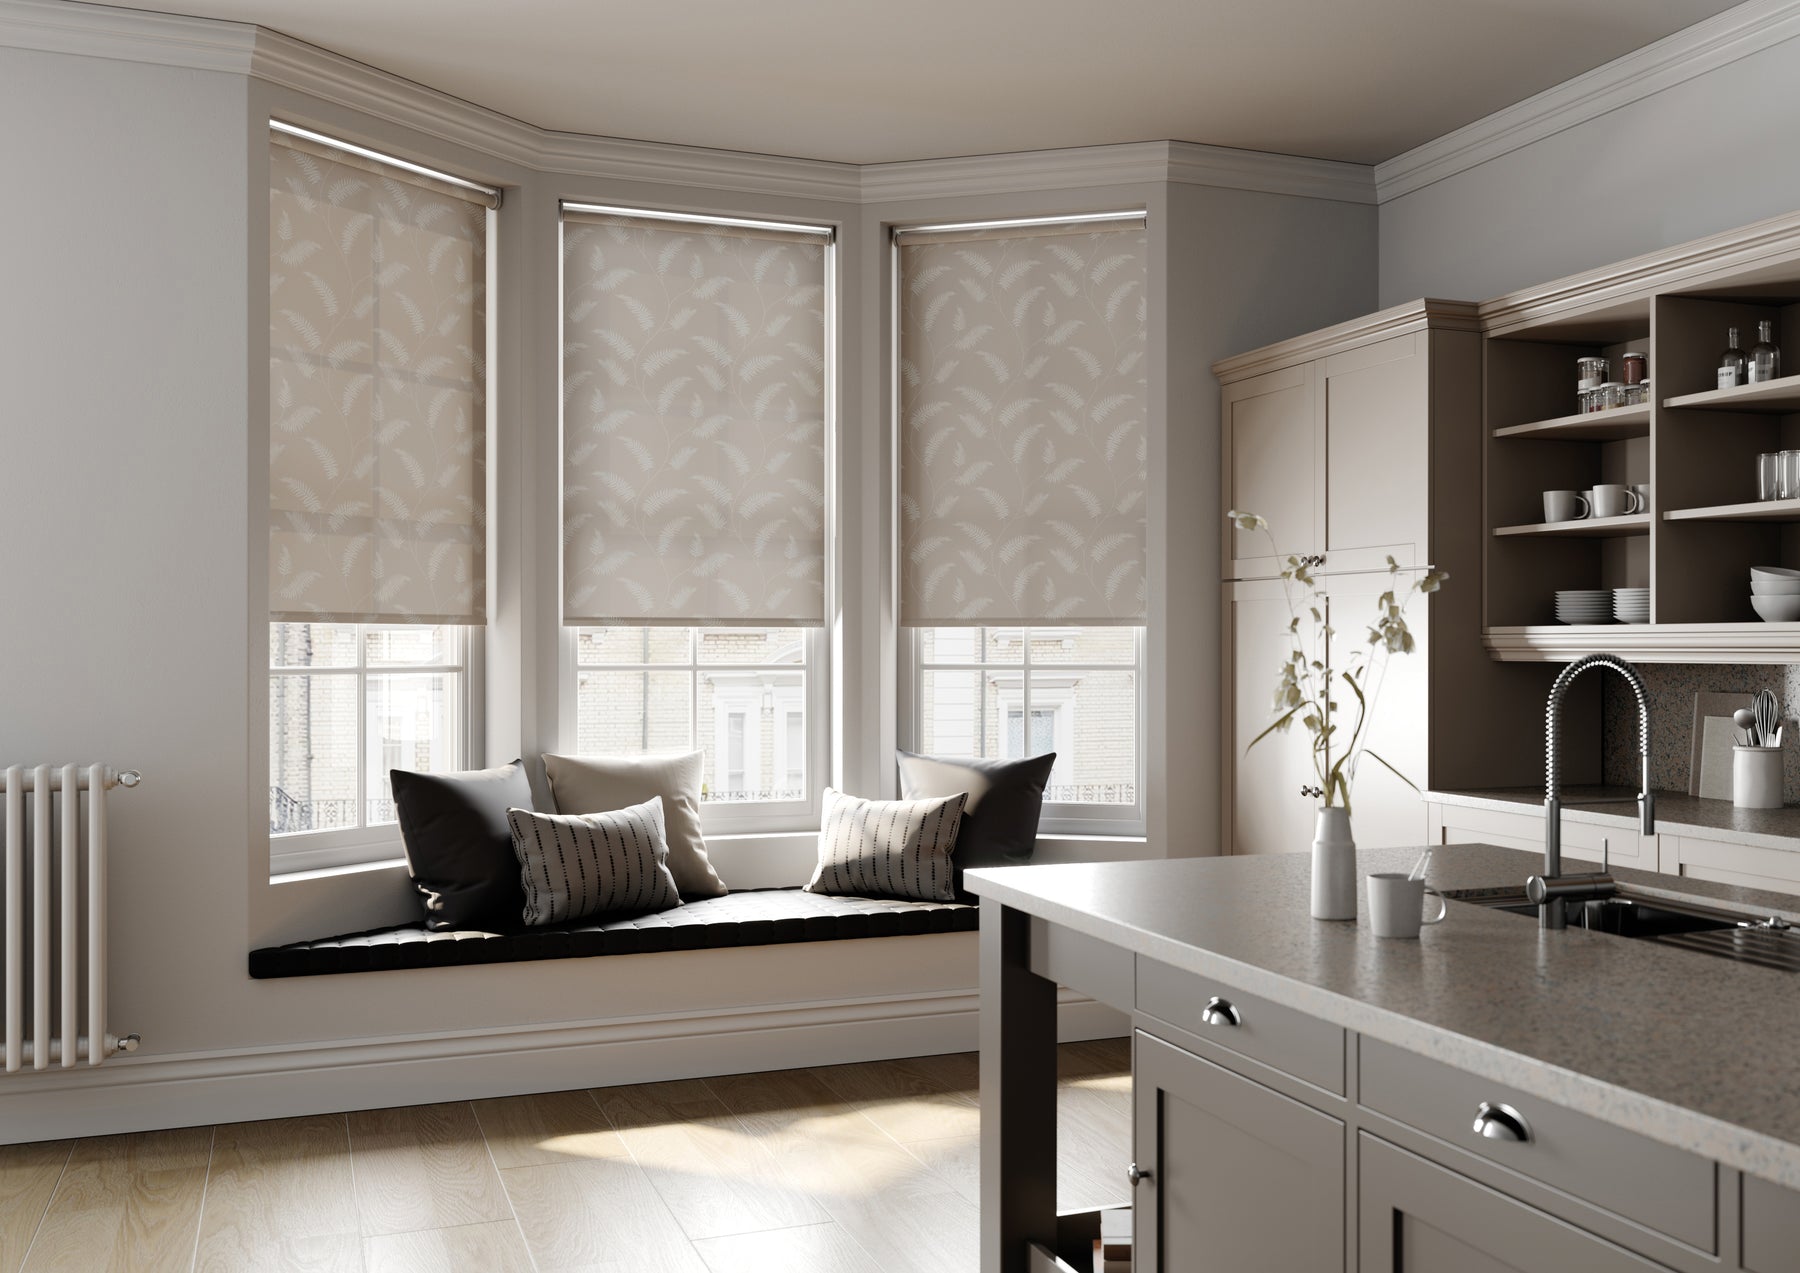 A Guide To Floral Roller Blinds for Kitchen Windows